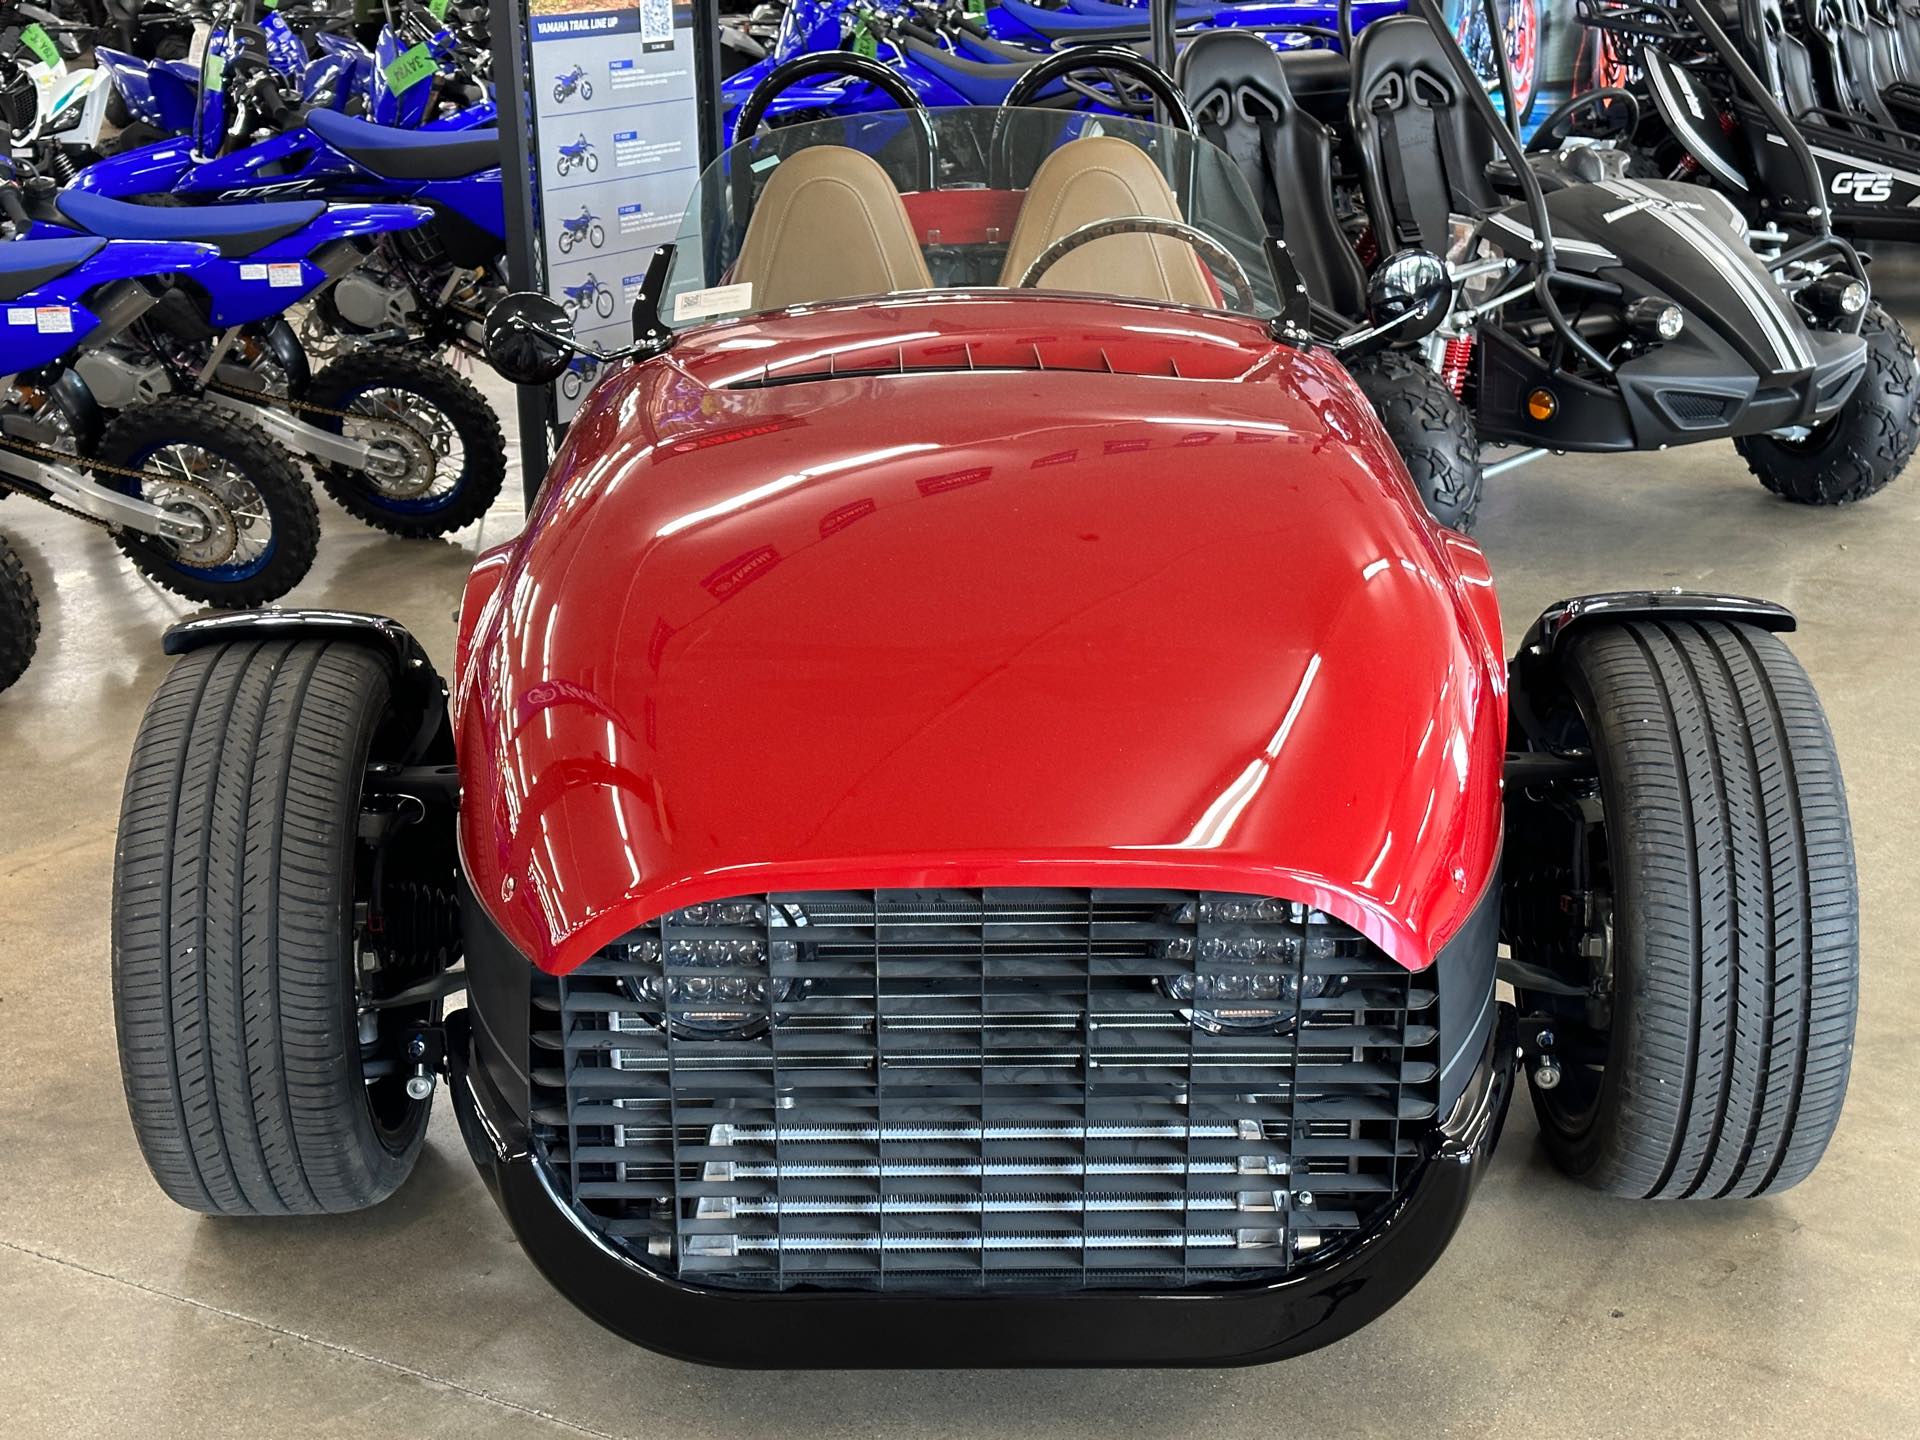 2023 Vanderhall Venice GT at ATVs and More